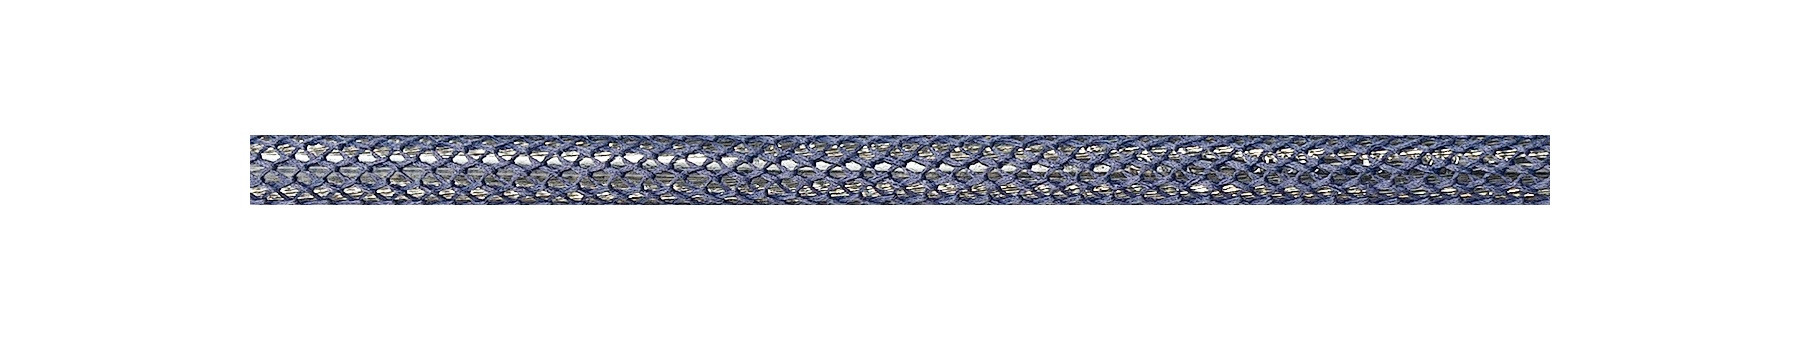 Textile Cable Lilac Netlike Textile Covering